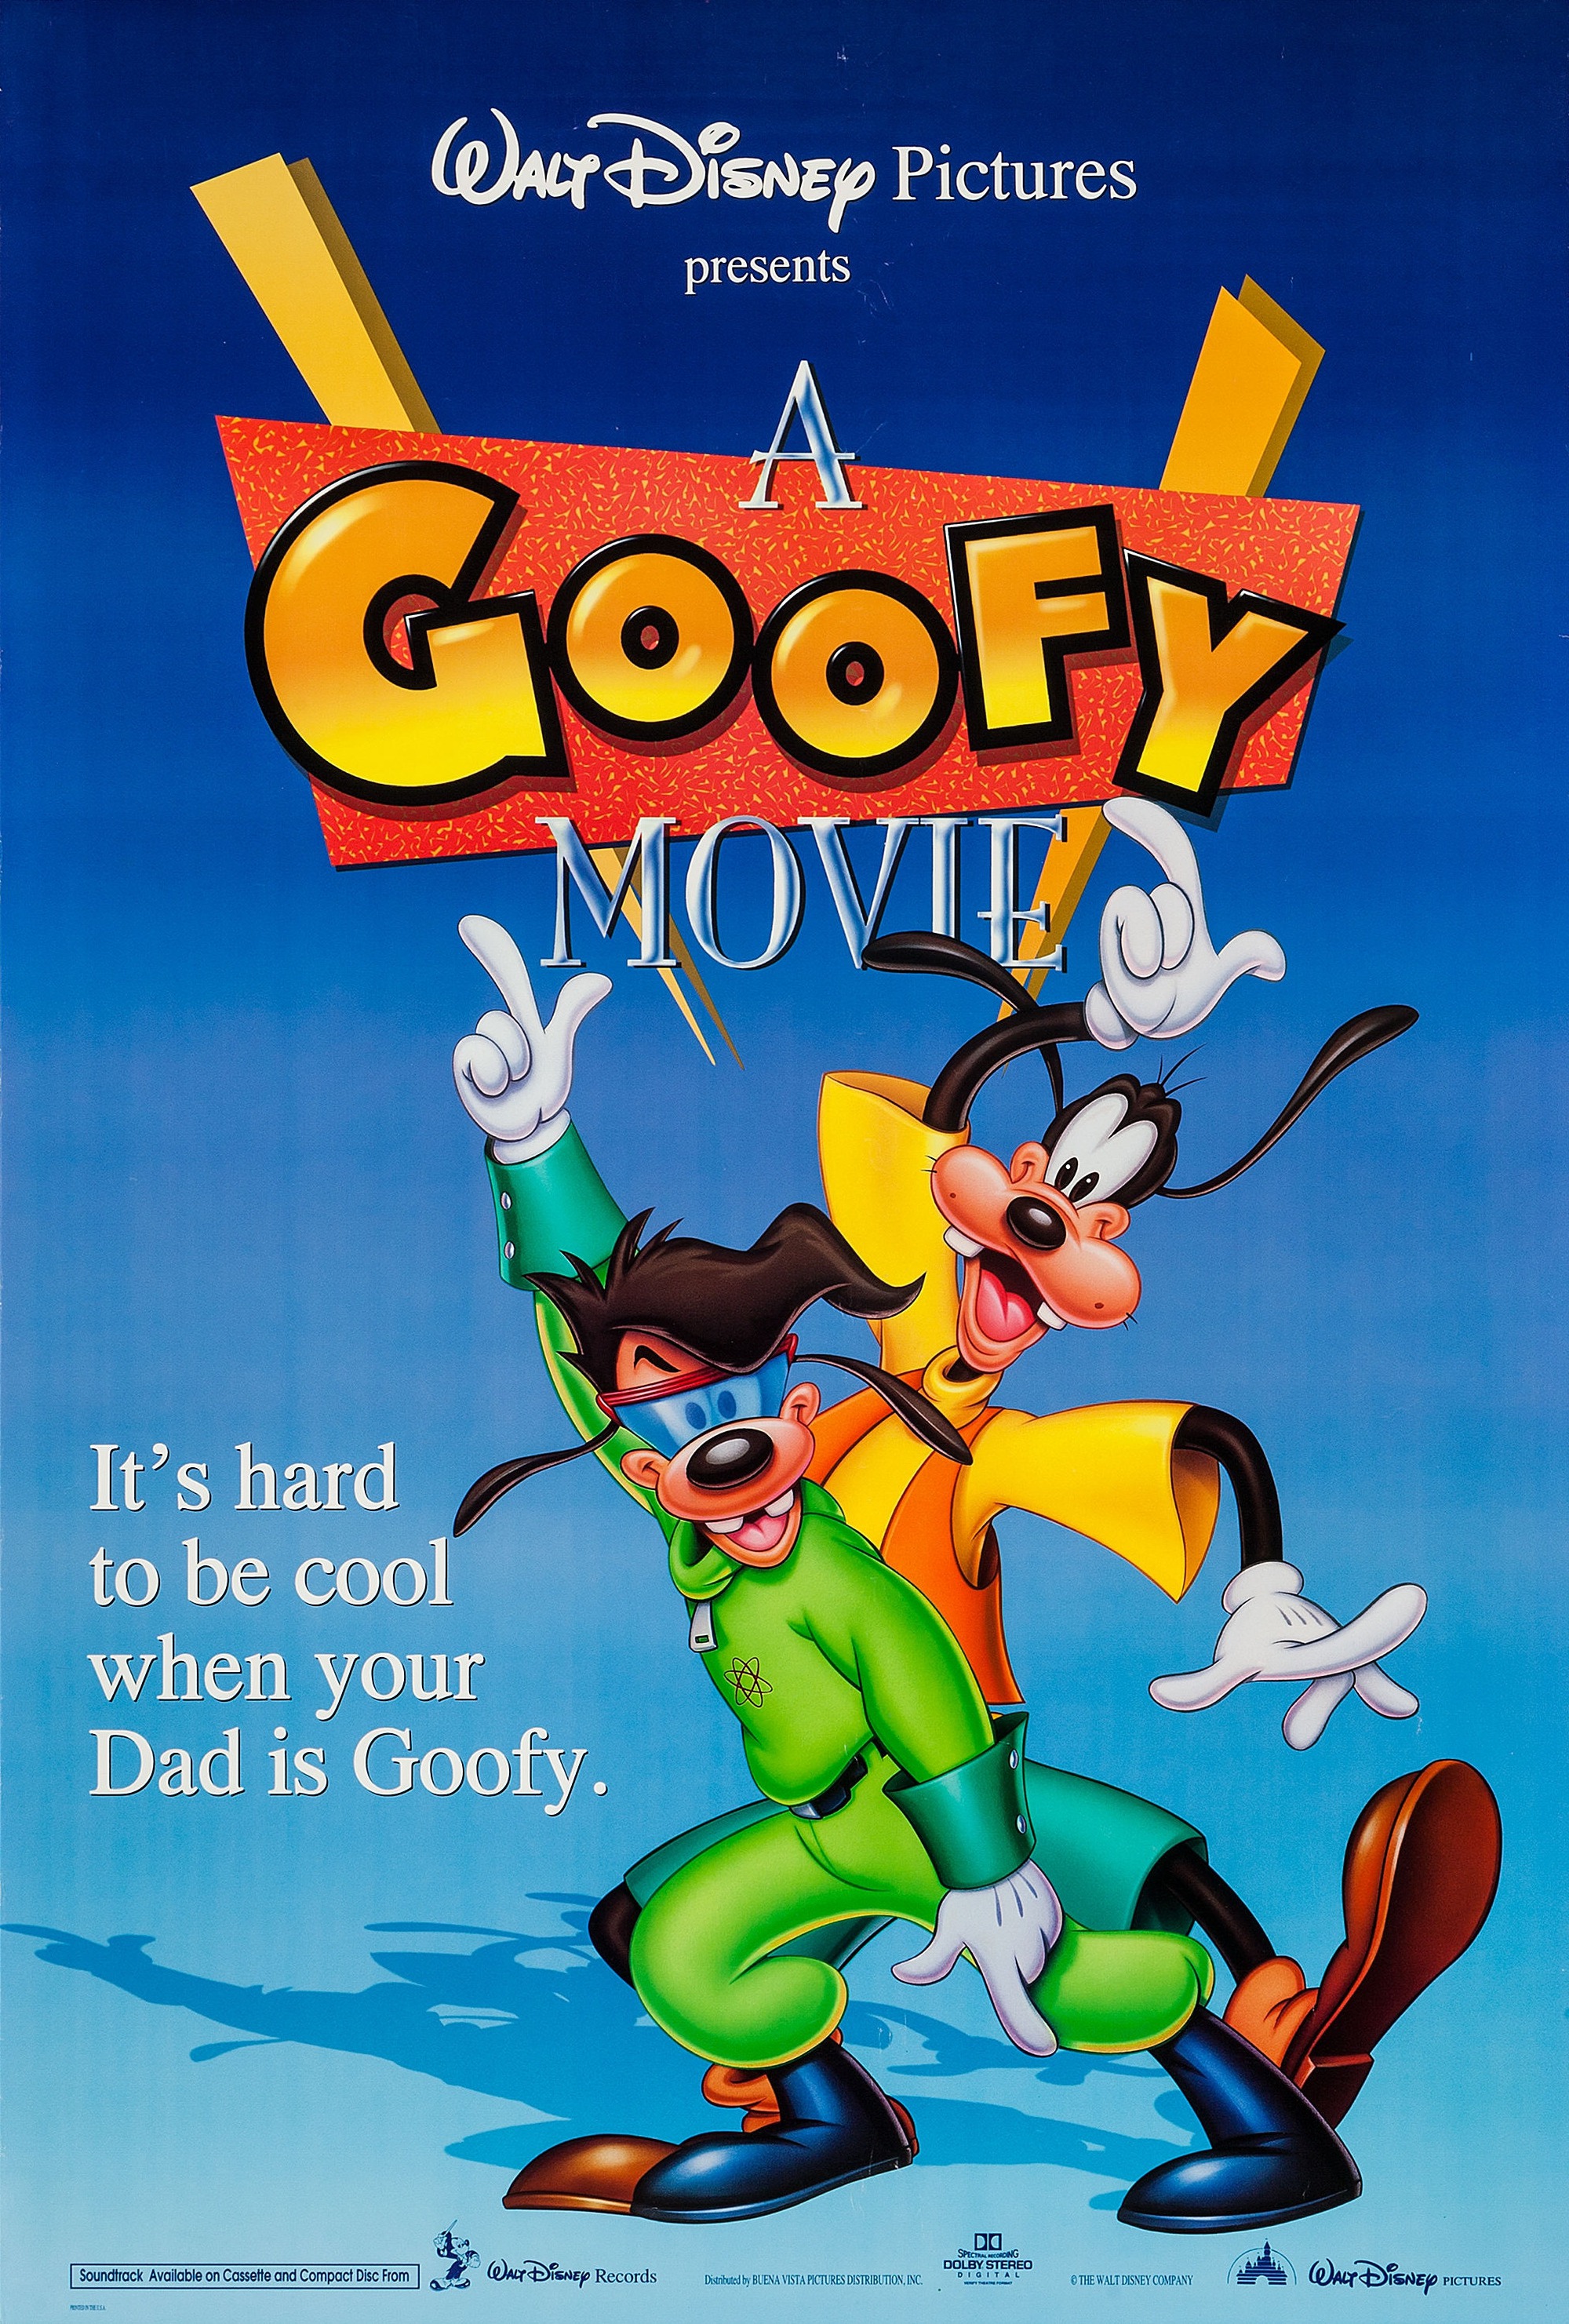 Mega Sized Movie Poster Image for A Goofy Movie 